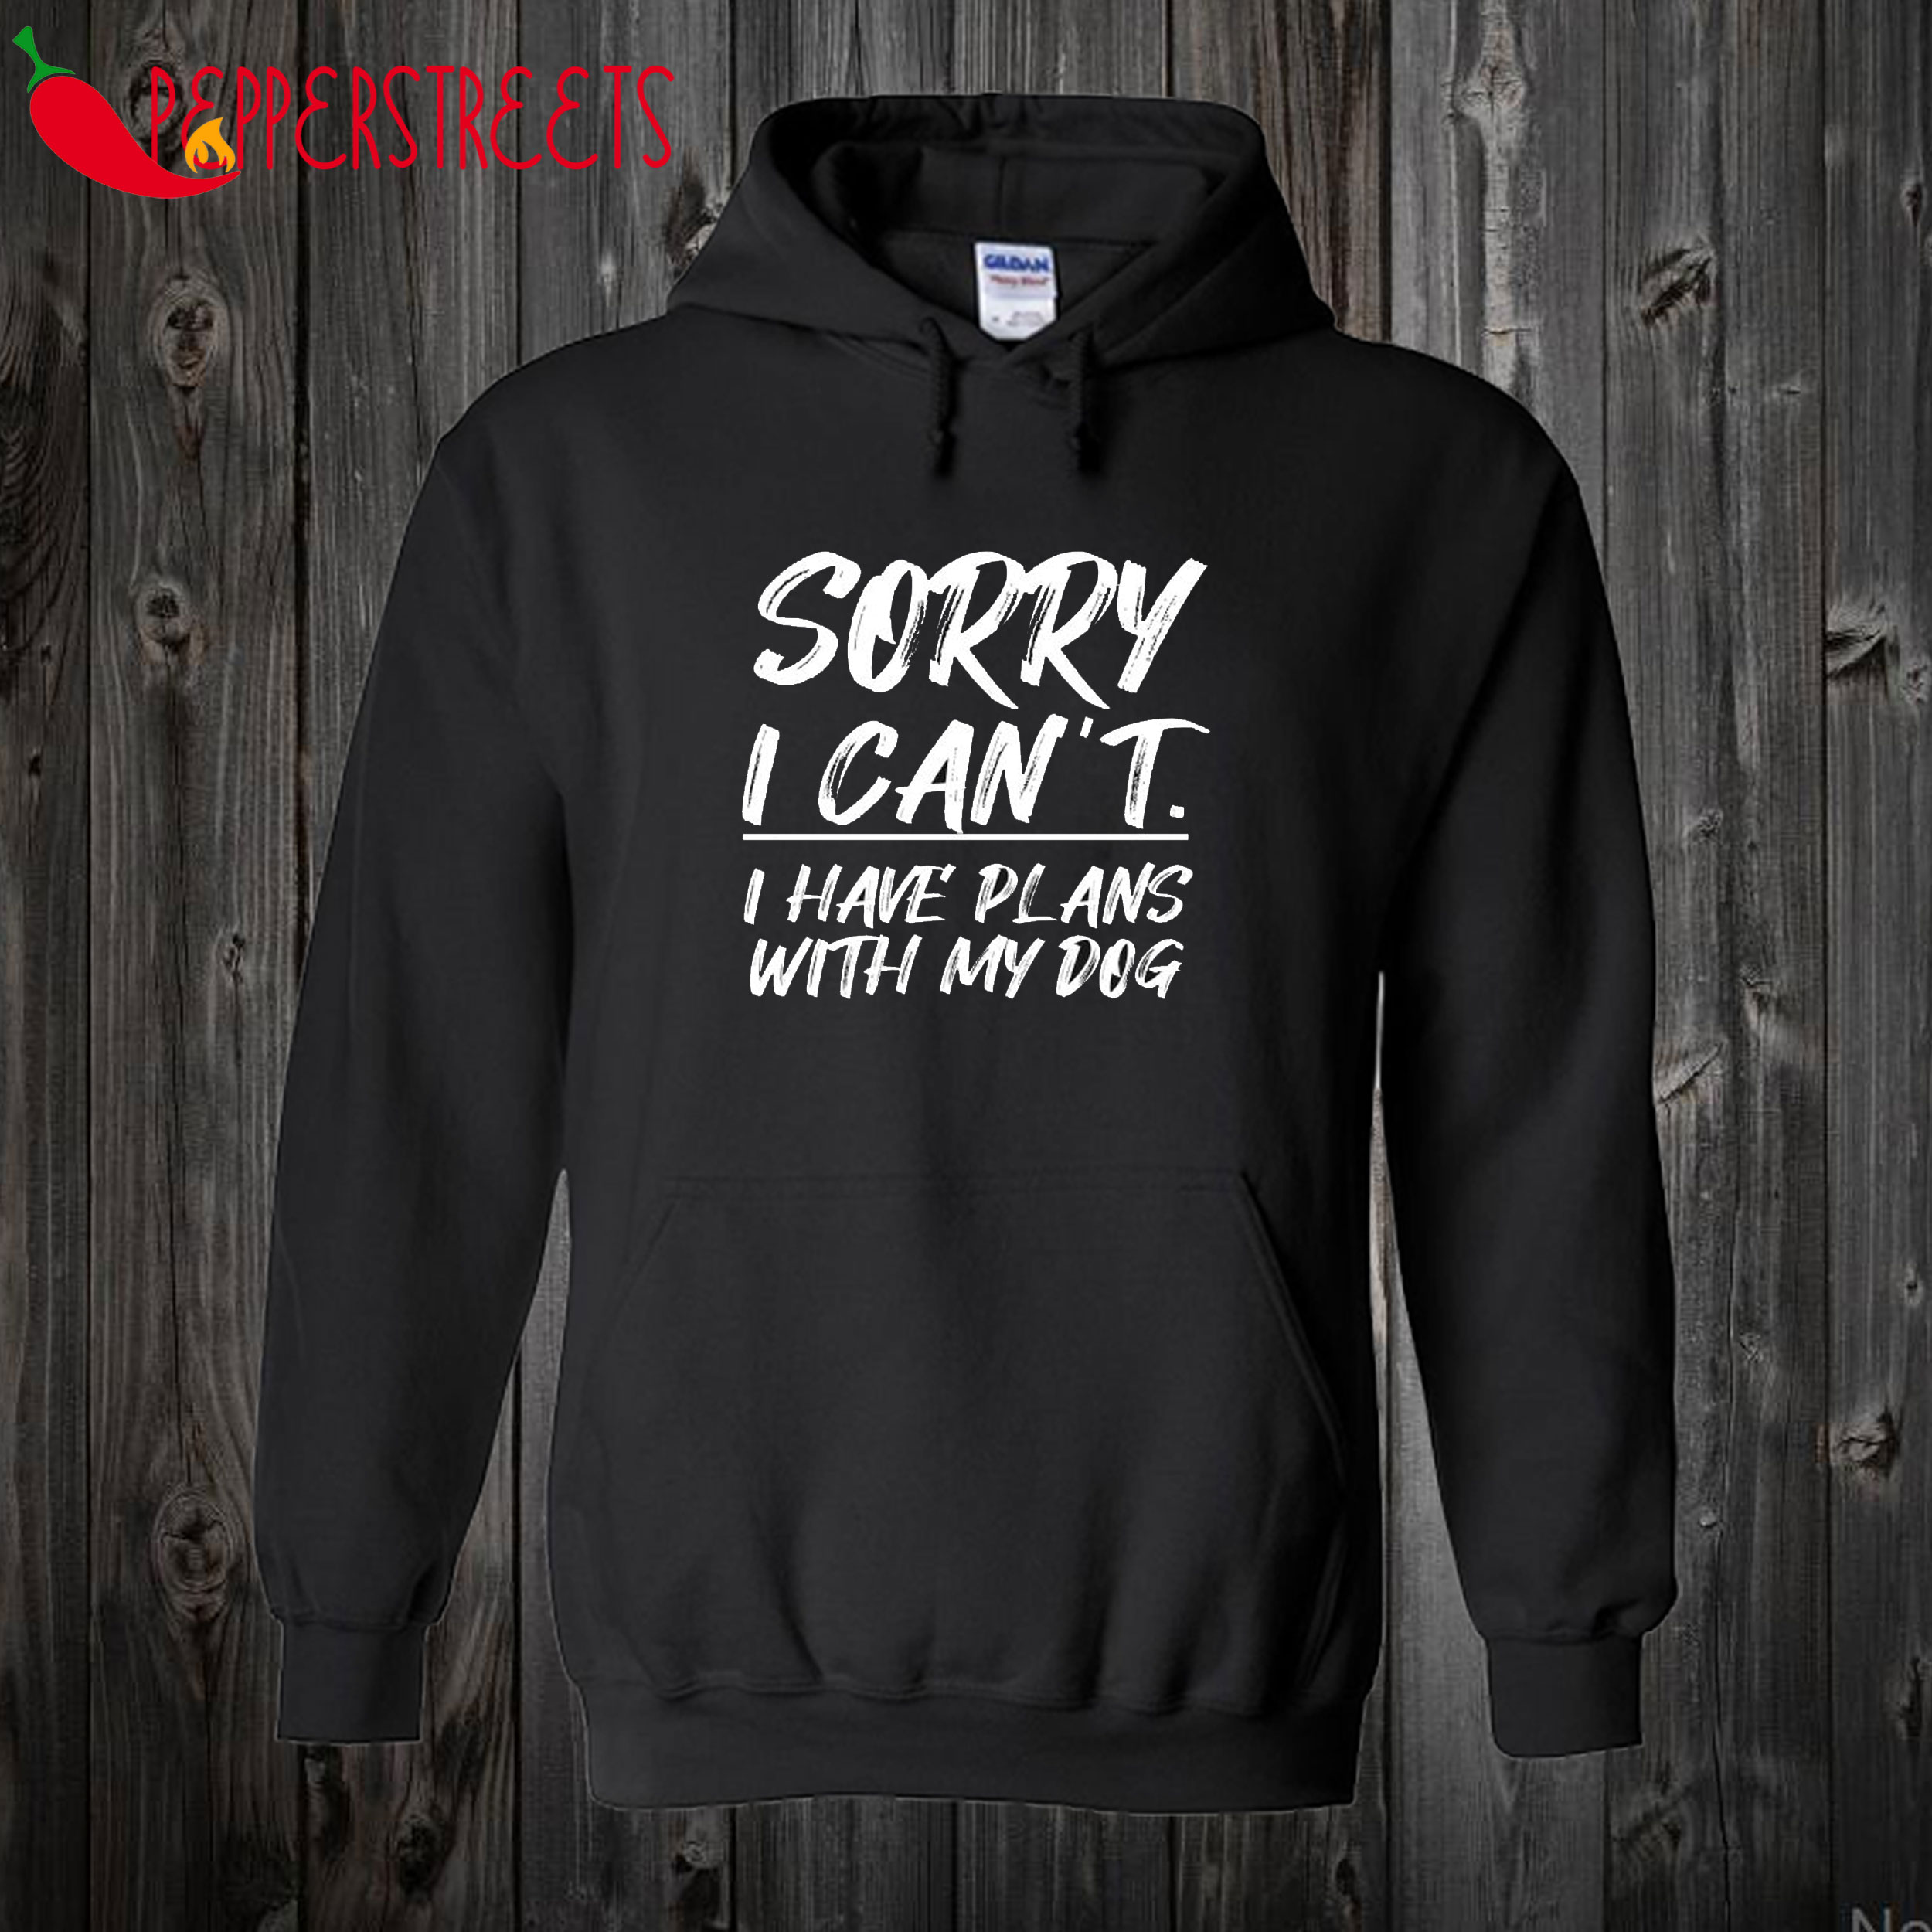 Sorry I Cant. I Have Plans With My Dog Funny Pet Animal Cute Pullover Hoodie